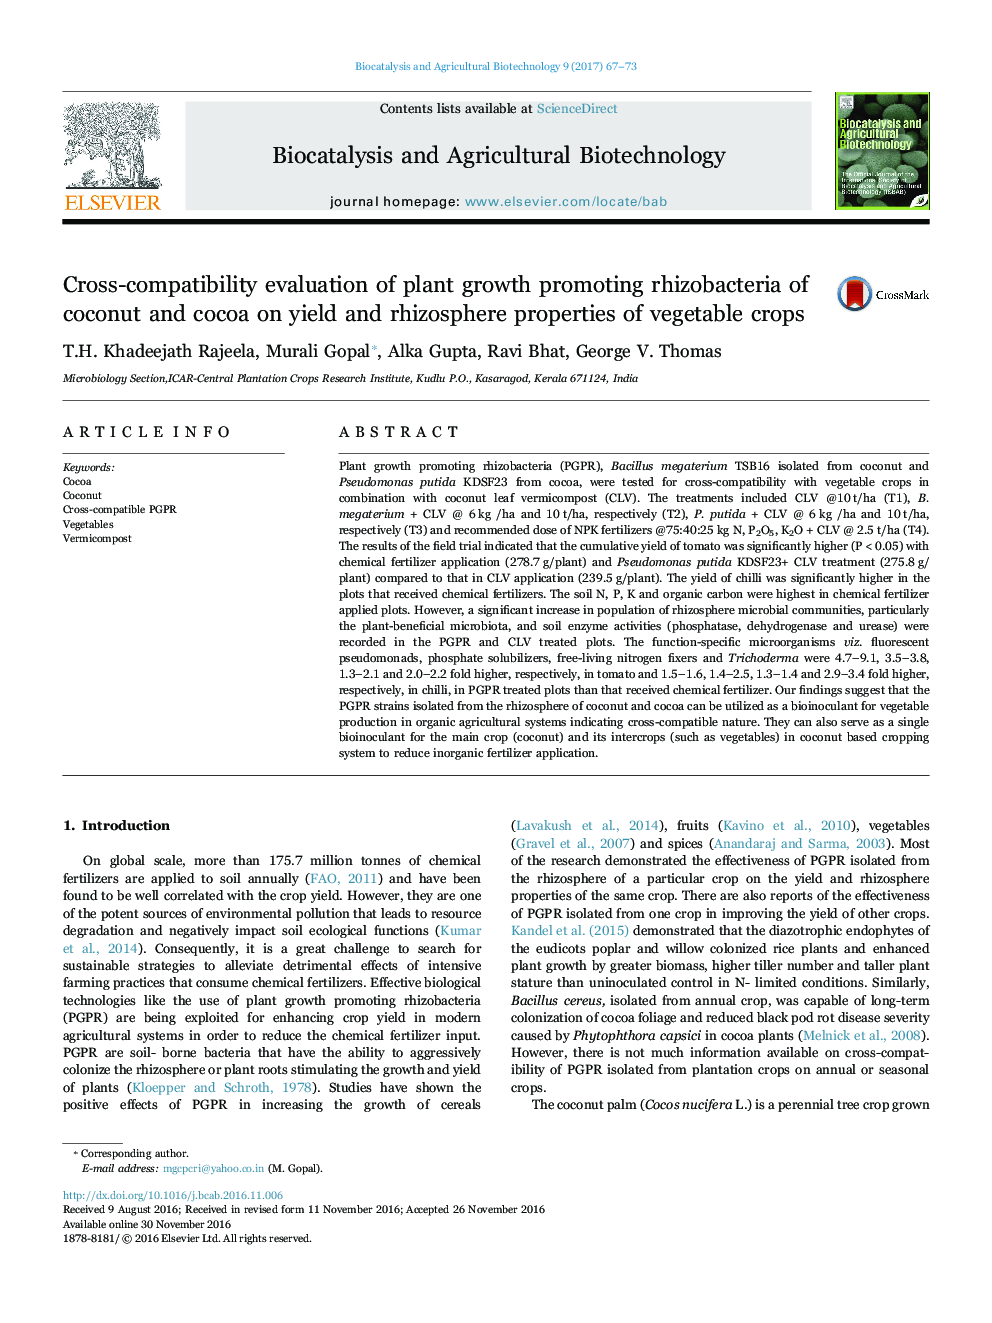 Cross-compatibility evaluation of plant growth promoting rhizobacteria of coconut and cocoa on yield and rhizosphere properties of vegetable crops